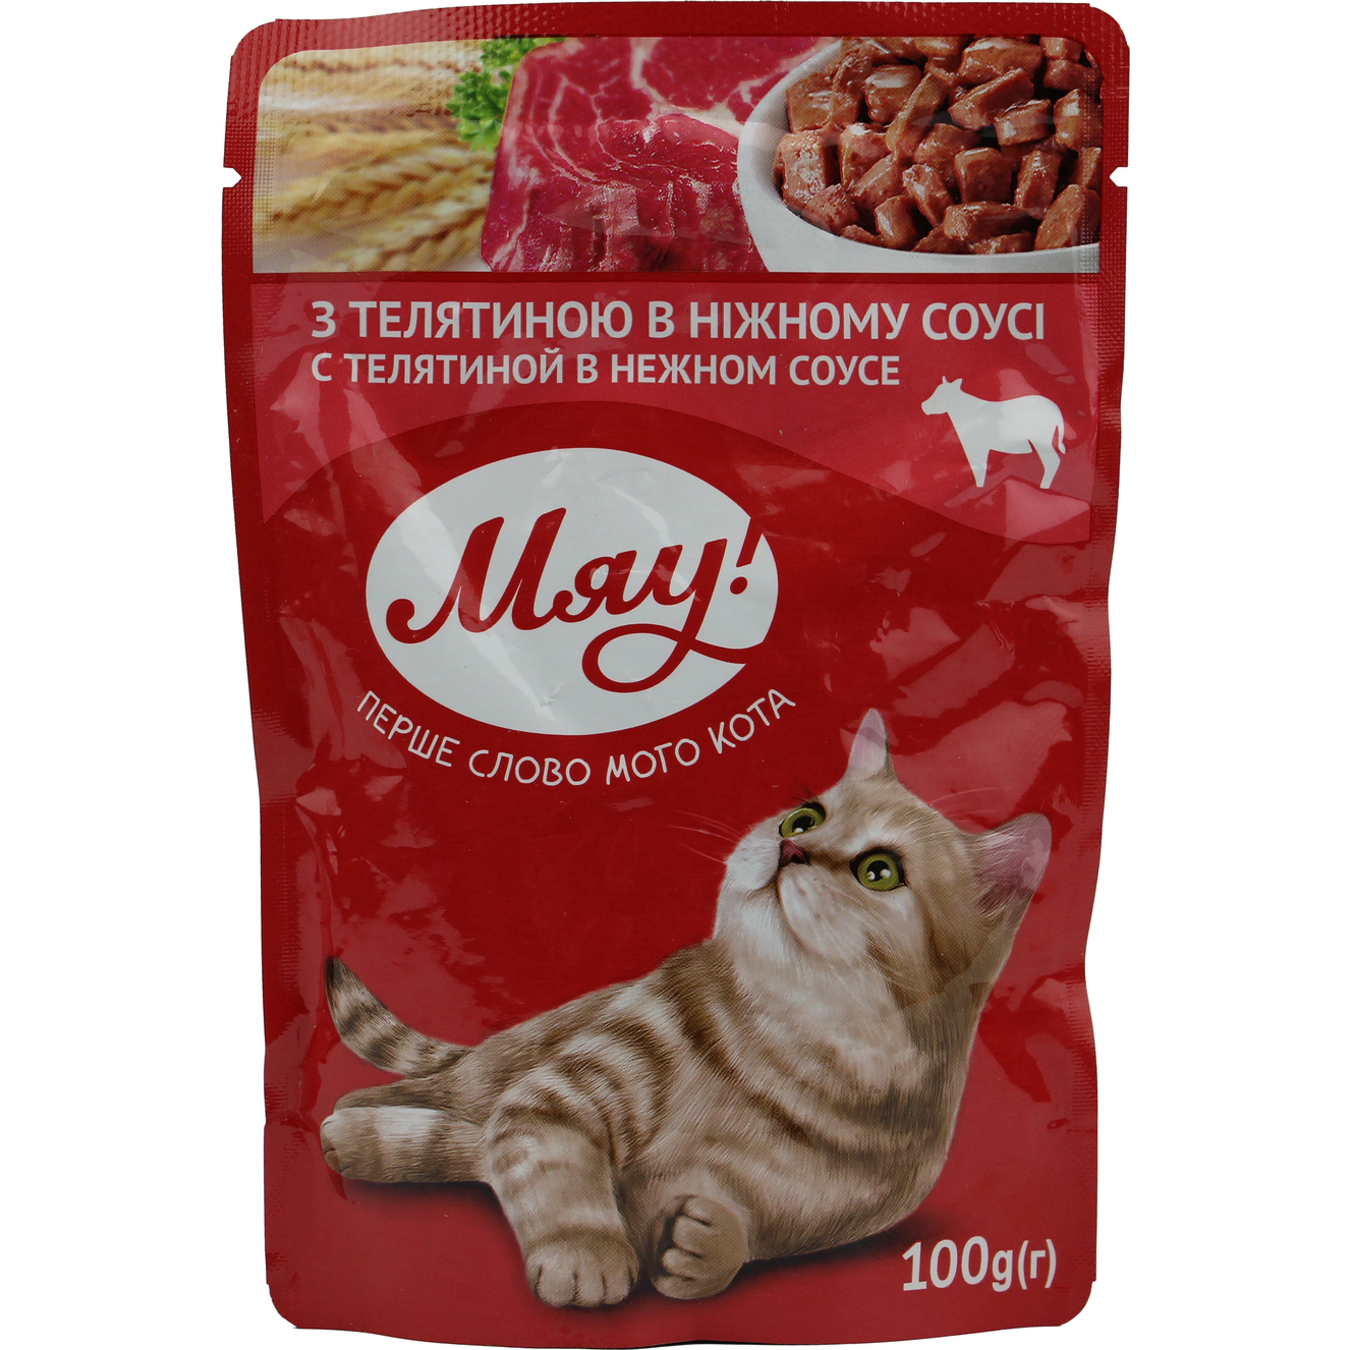 Miau! feed Veal in a gentle sauce100g